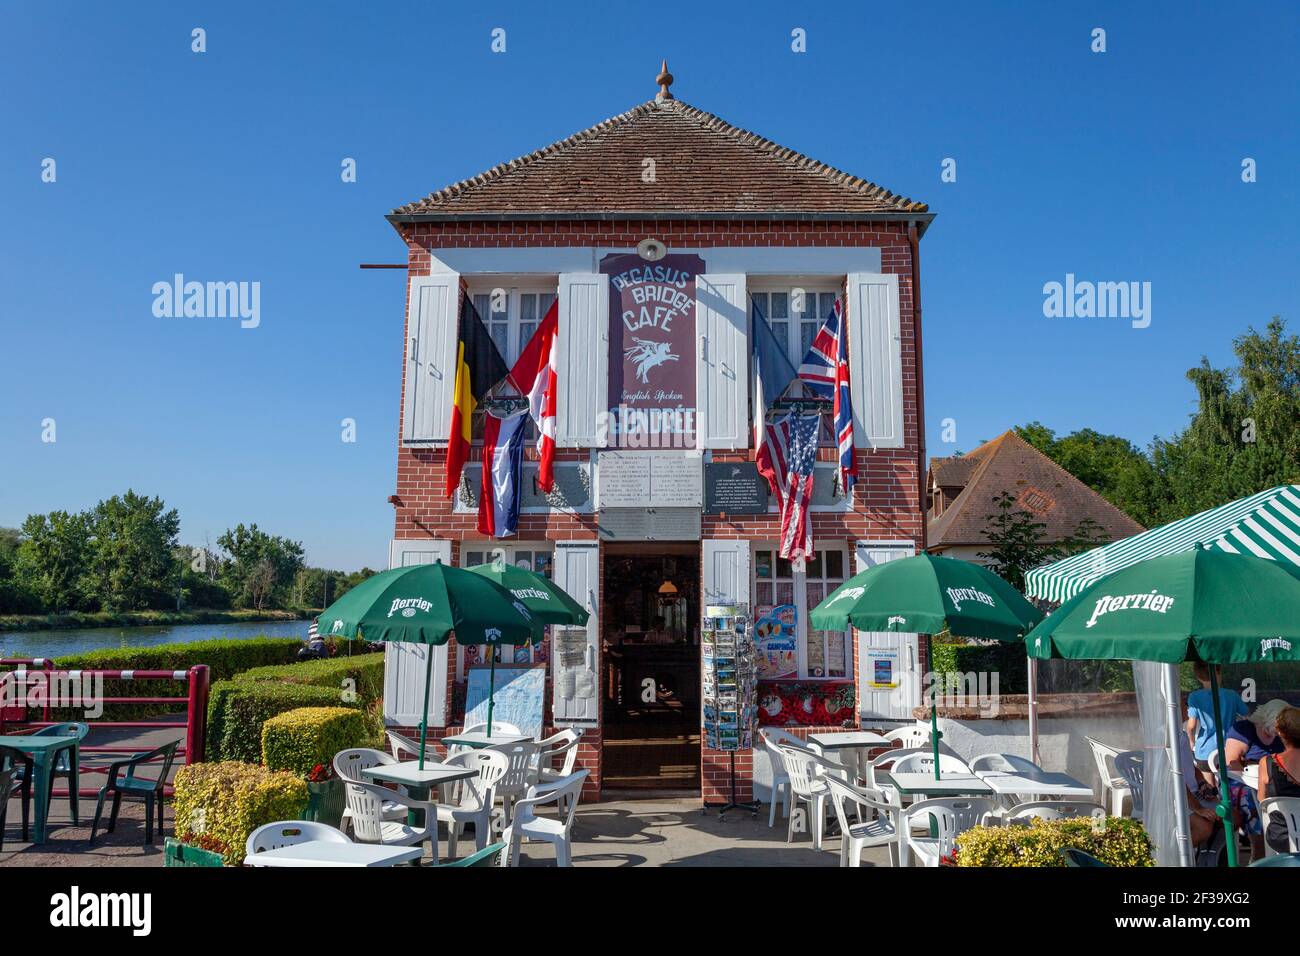 Benouville (Normandy, north-western France): the “Cafe Gondree” coffehouse near the Pegasus Bridge, over the Caen Canal, is said by some to be the fir Stock Photo